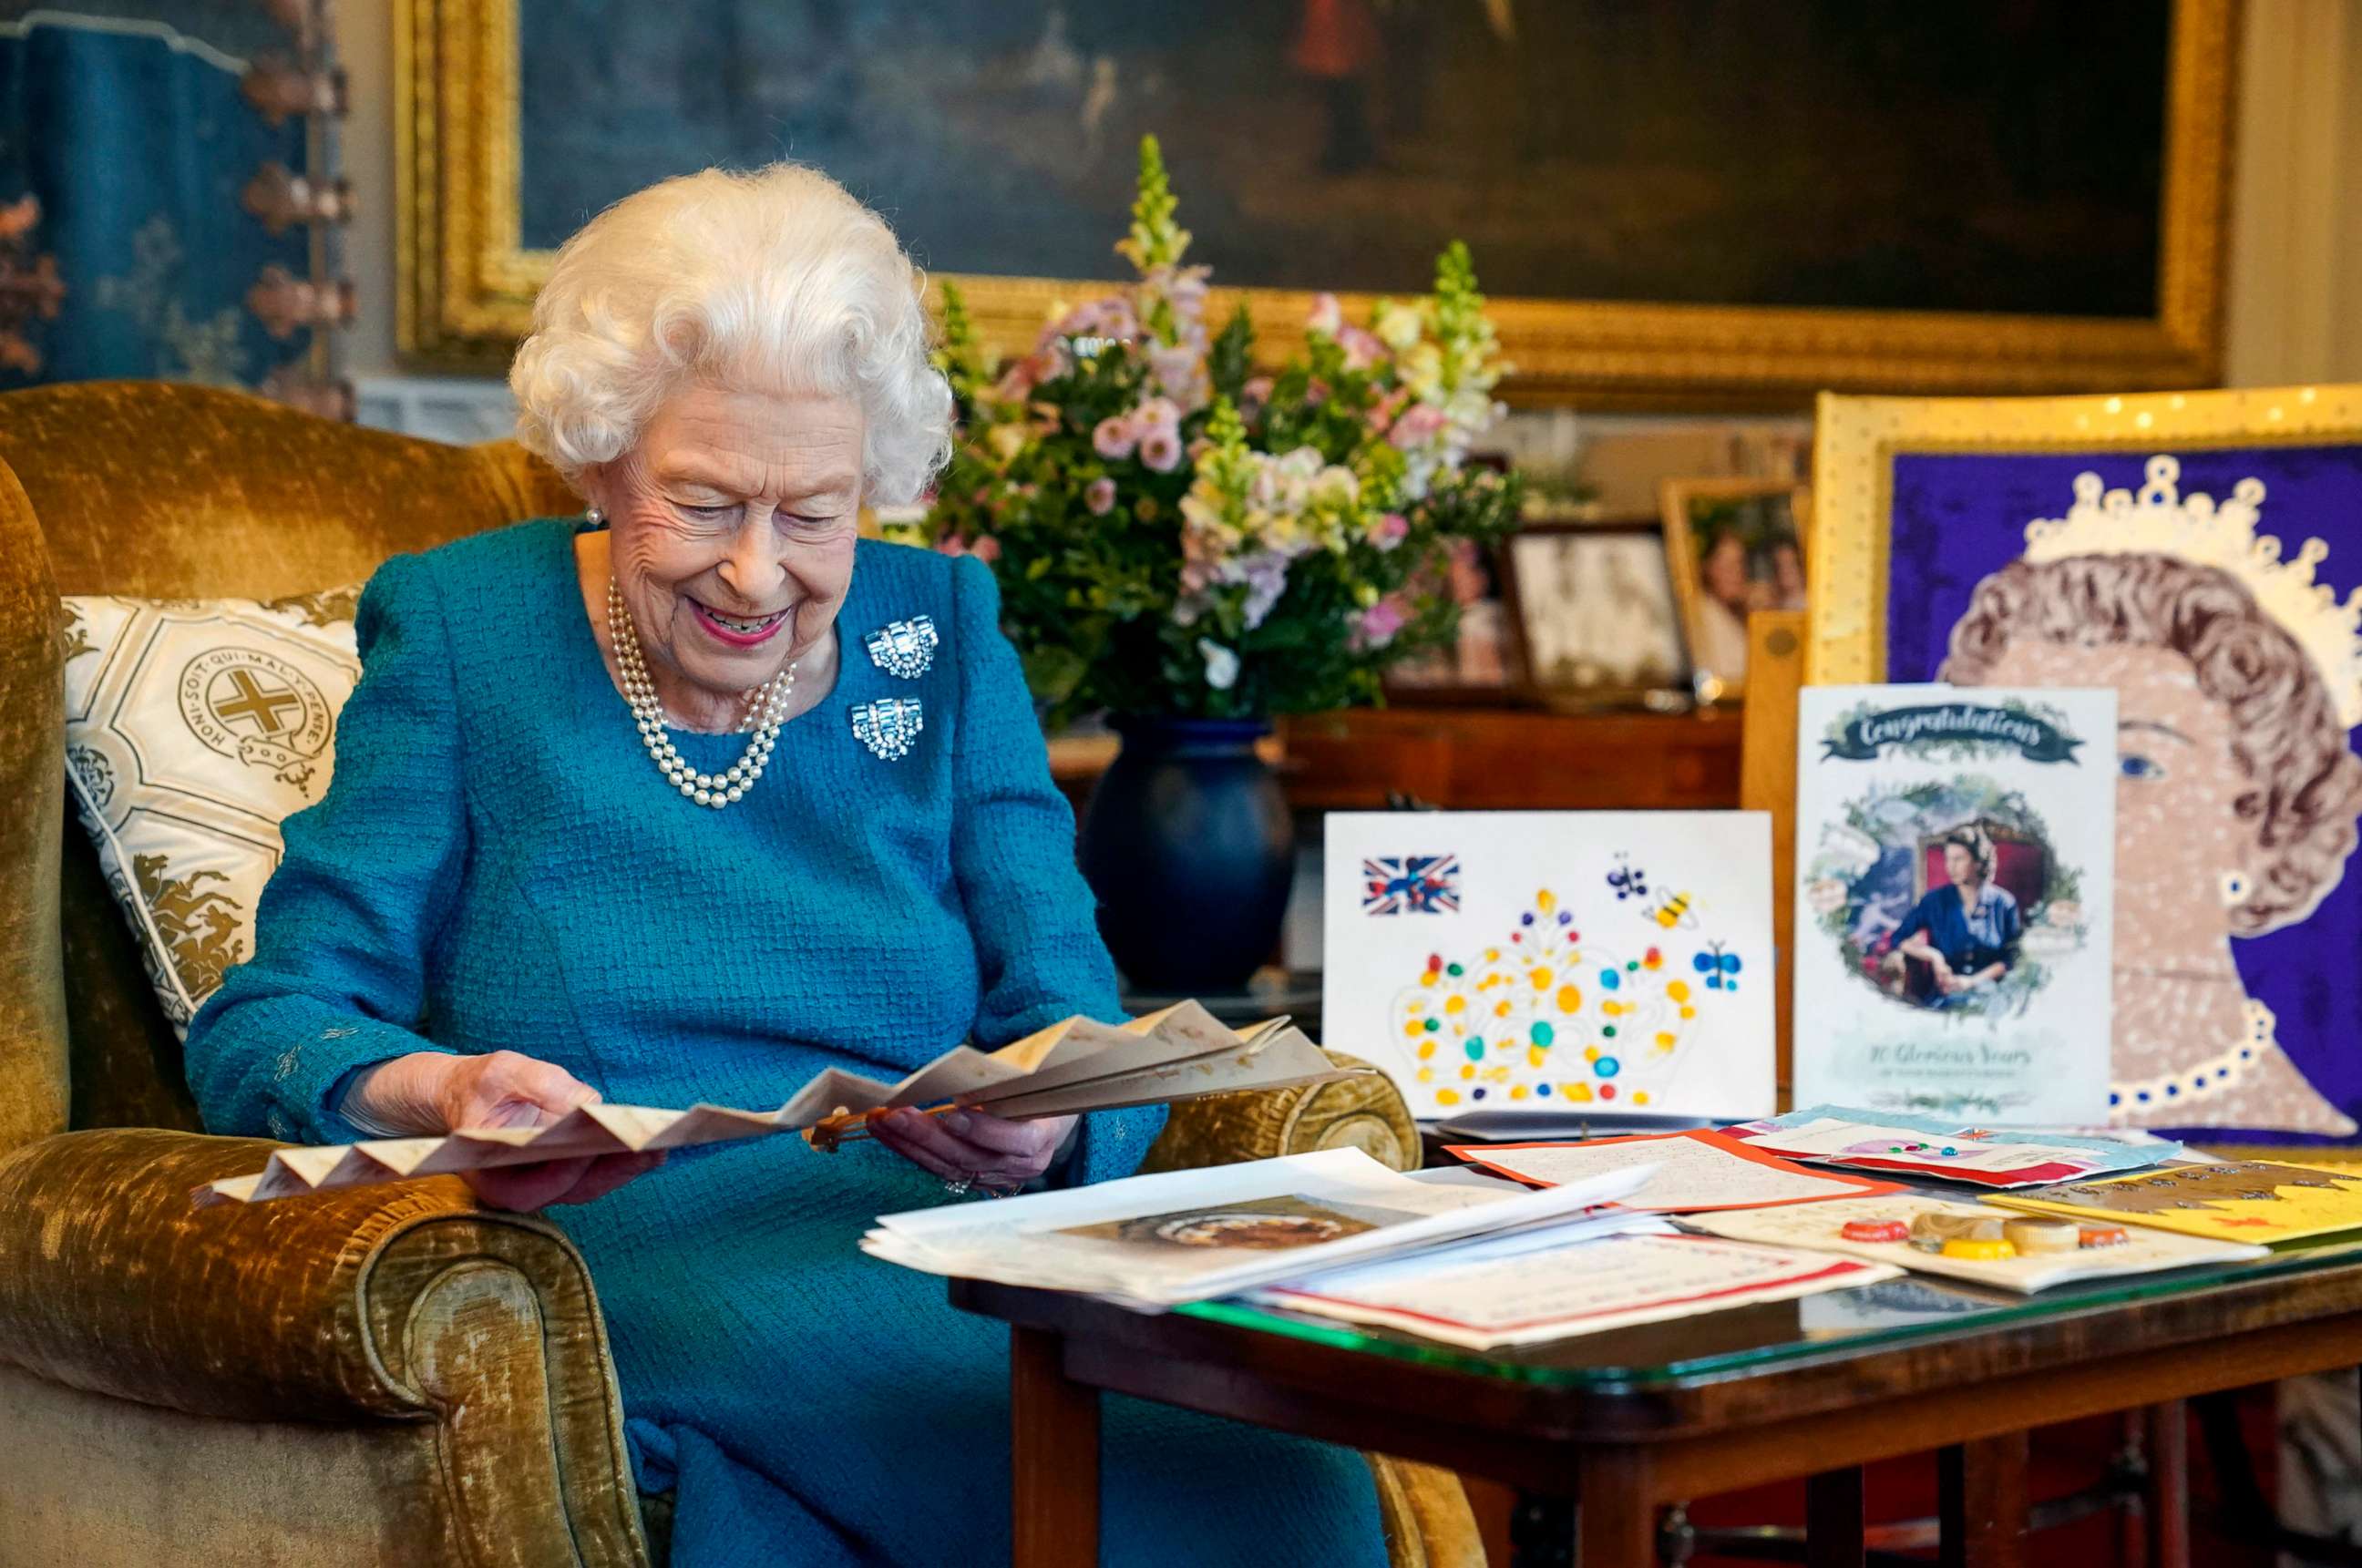 PHOTO: A picture released in London on Feb. 4, 2022, and taken last month shows Britain's Queen Elizabeth II as she views a display of memorabilia from her Golden and Platinum Jubilees in the Oak Room at Windsor Castle.